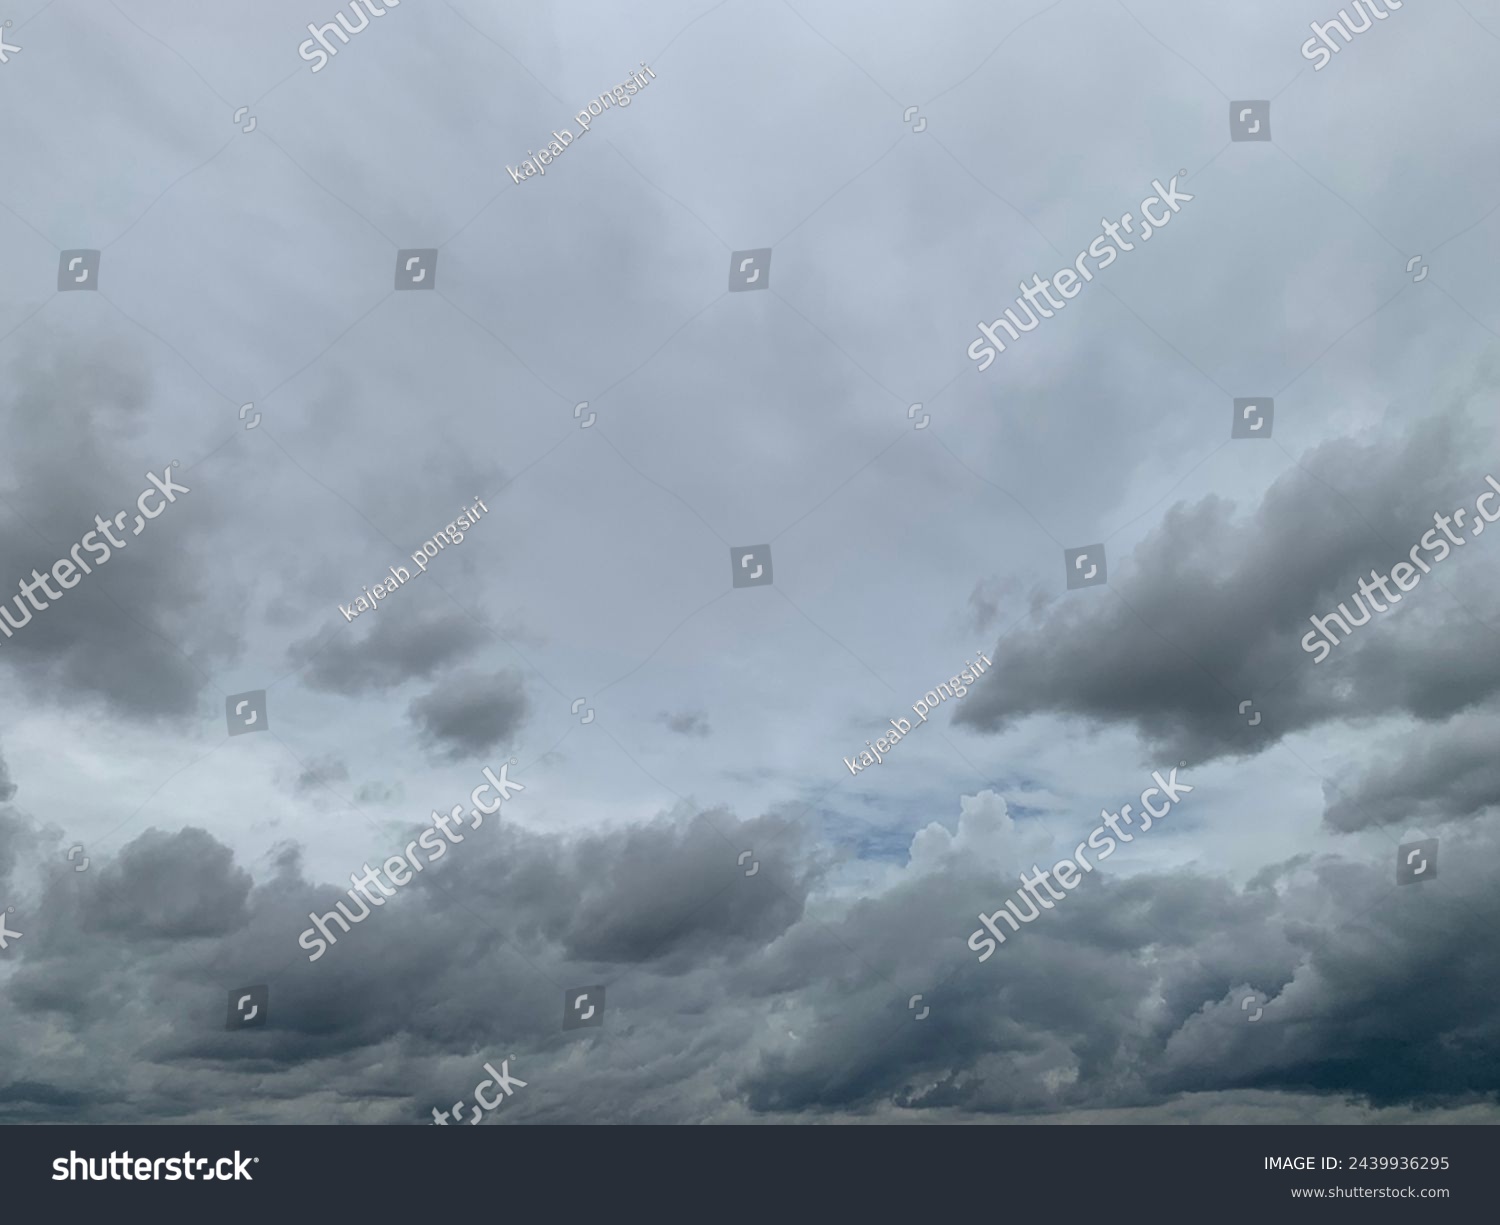 Gray nimbostratus clouds roll in layers above the sky, carried by the wind Long continuous rain in Trang Province, Thailand. No focus #2439936295